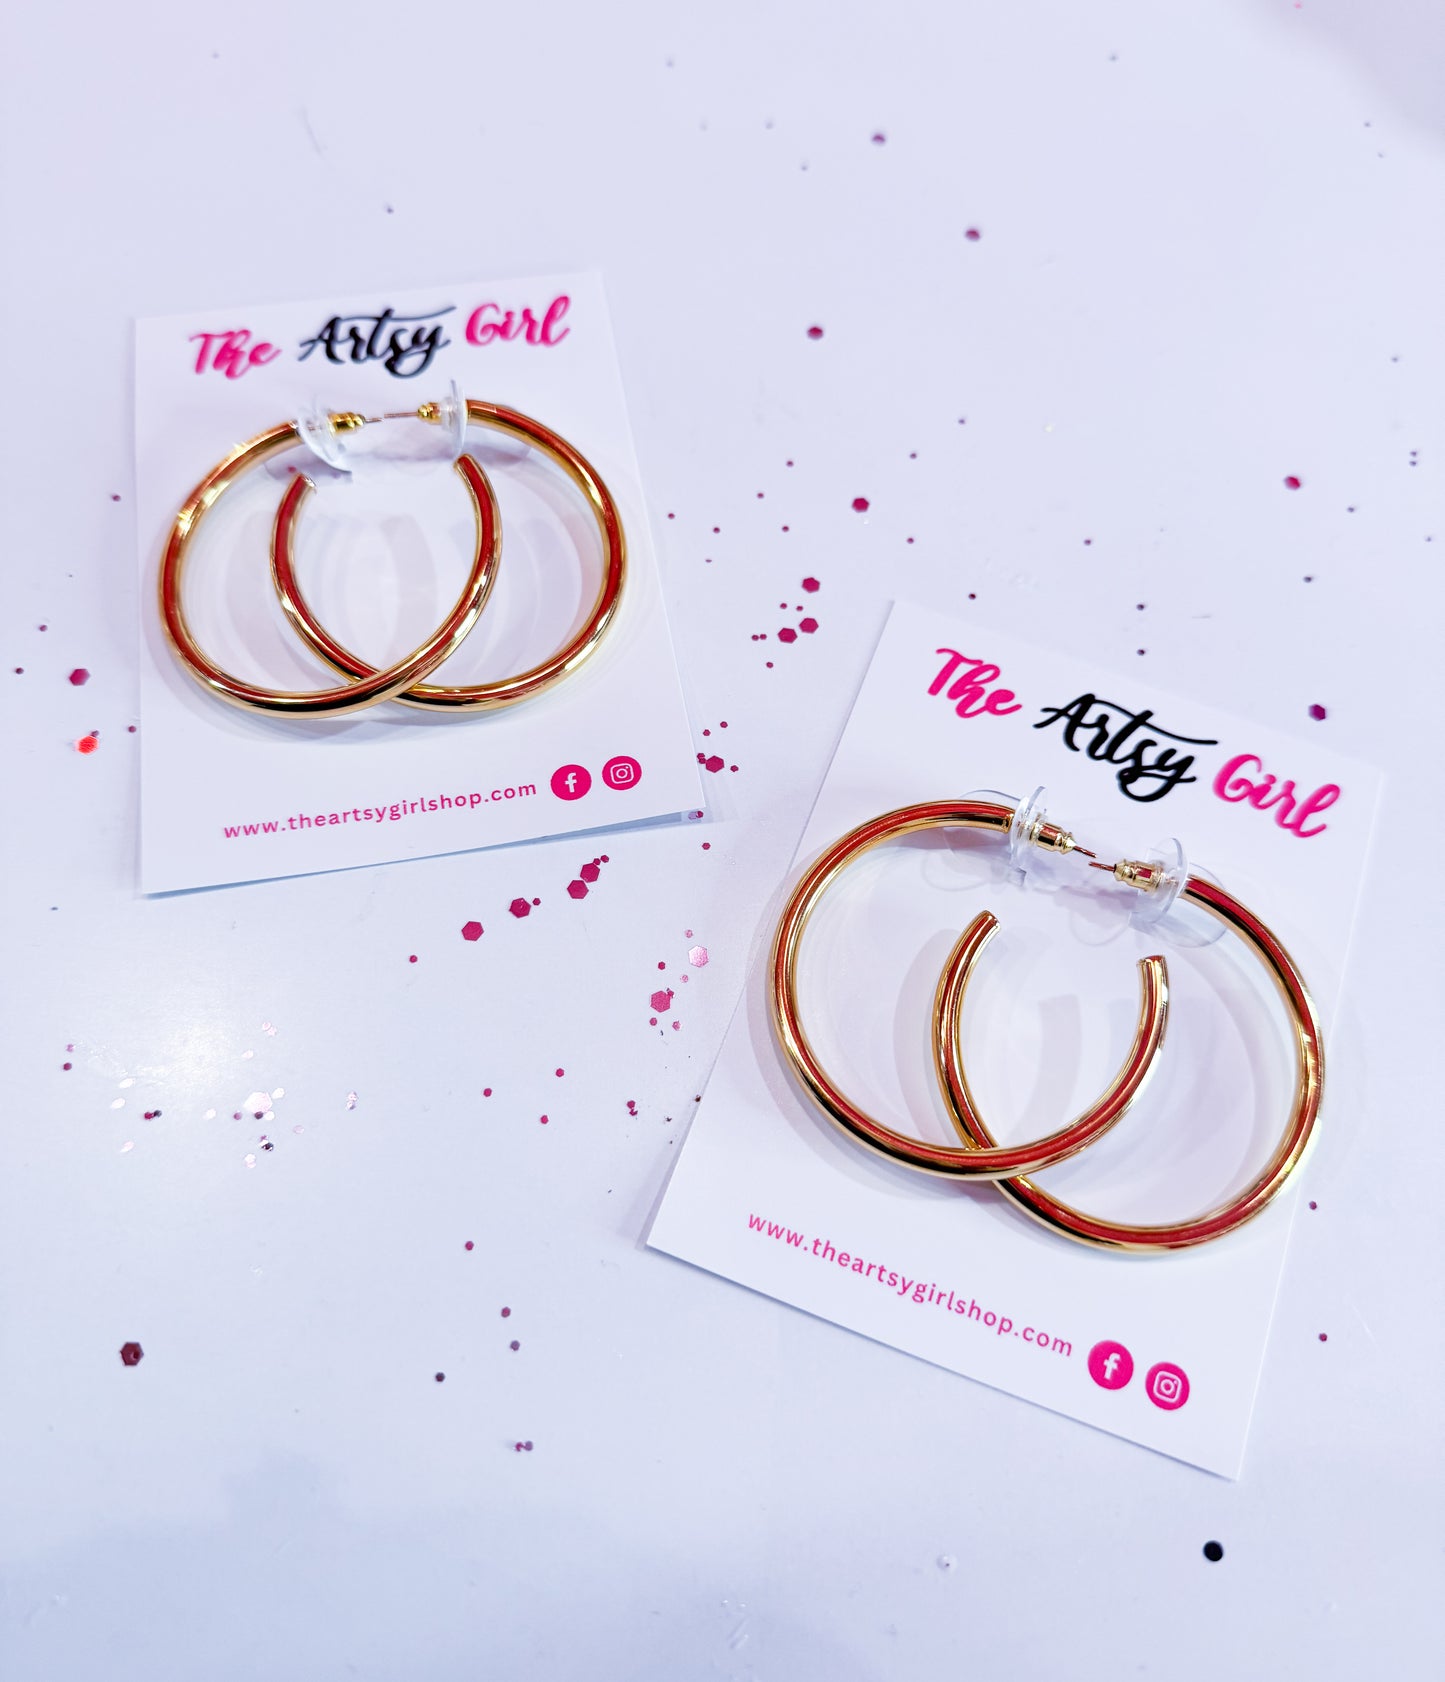 Basic Sparkle Life minimalist gold plated hoop earrings, designed for simplicity and elegance, perfect for elevating your everyday style with timeless chic.